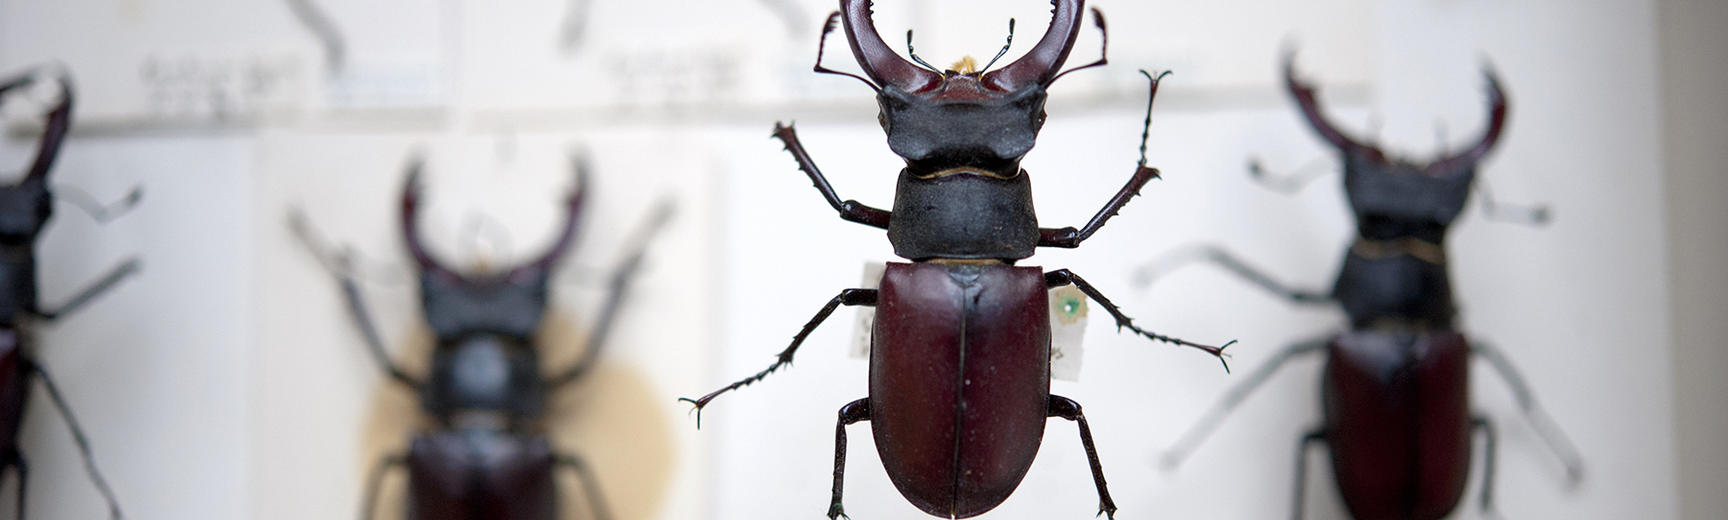 stag beetle oumnh